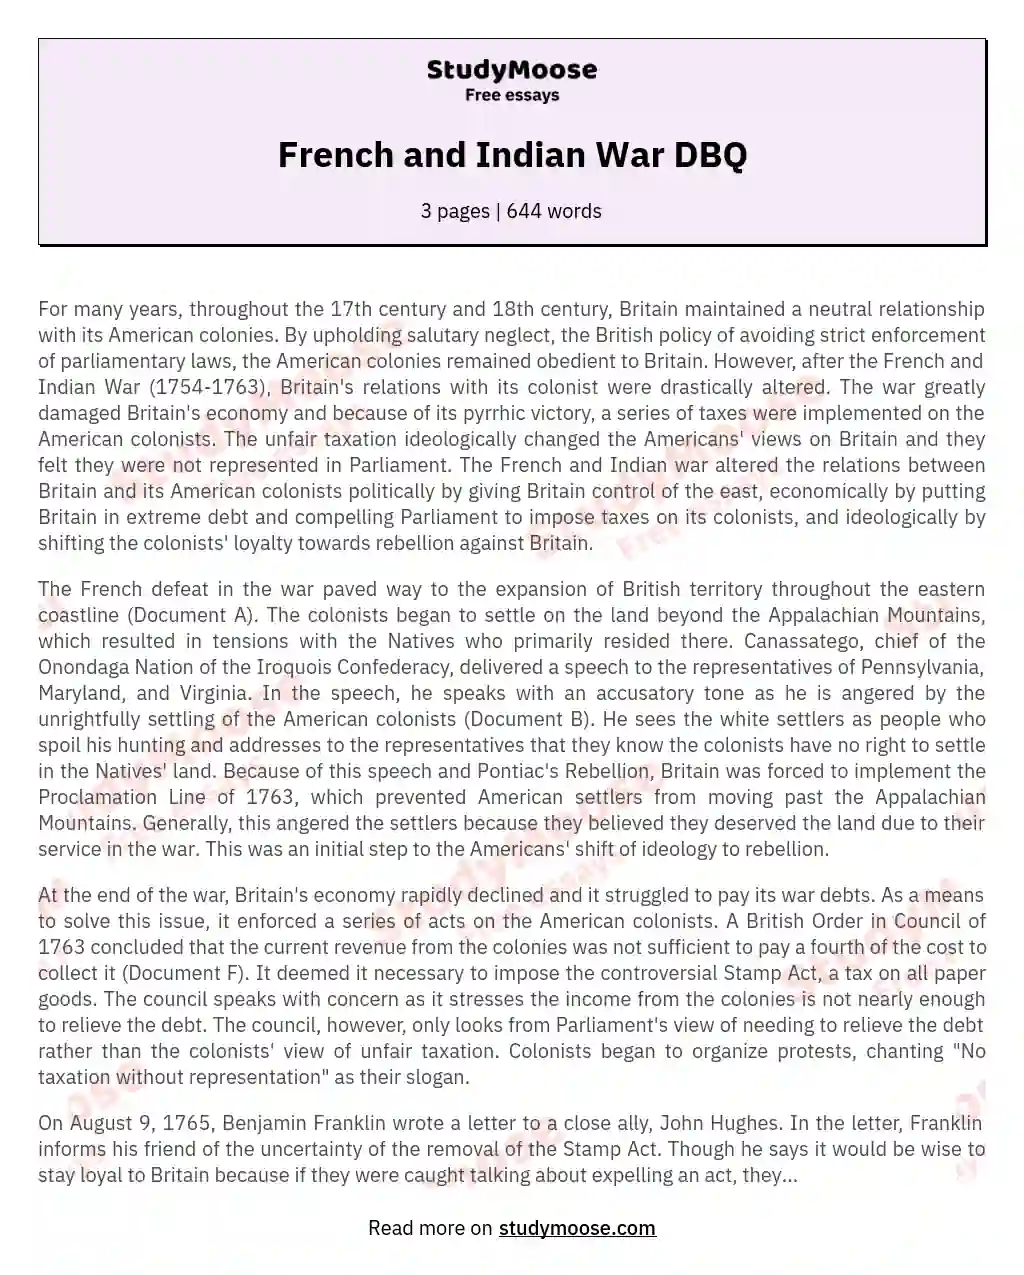 French and Indian War DBQ essay